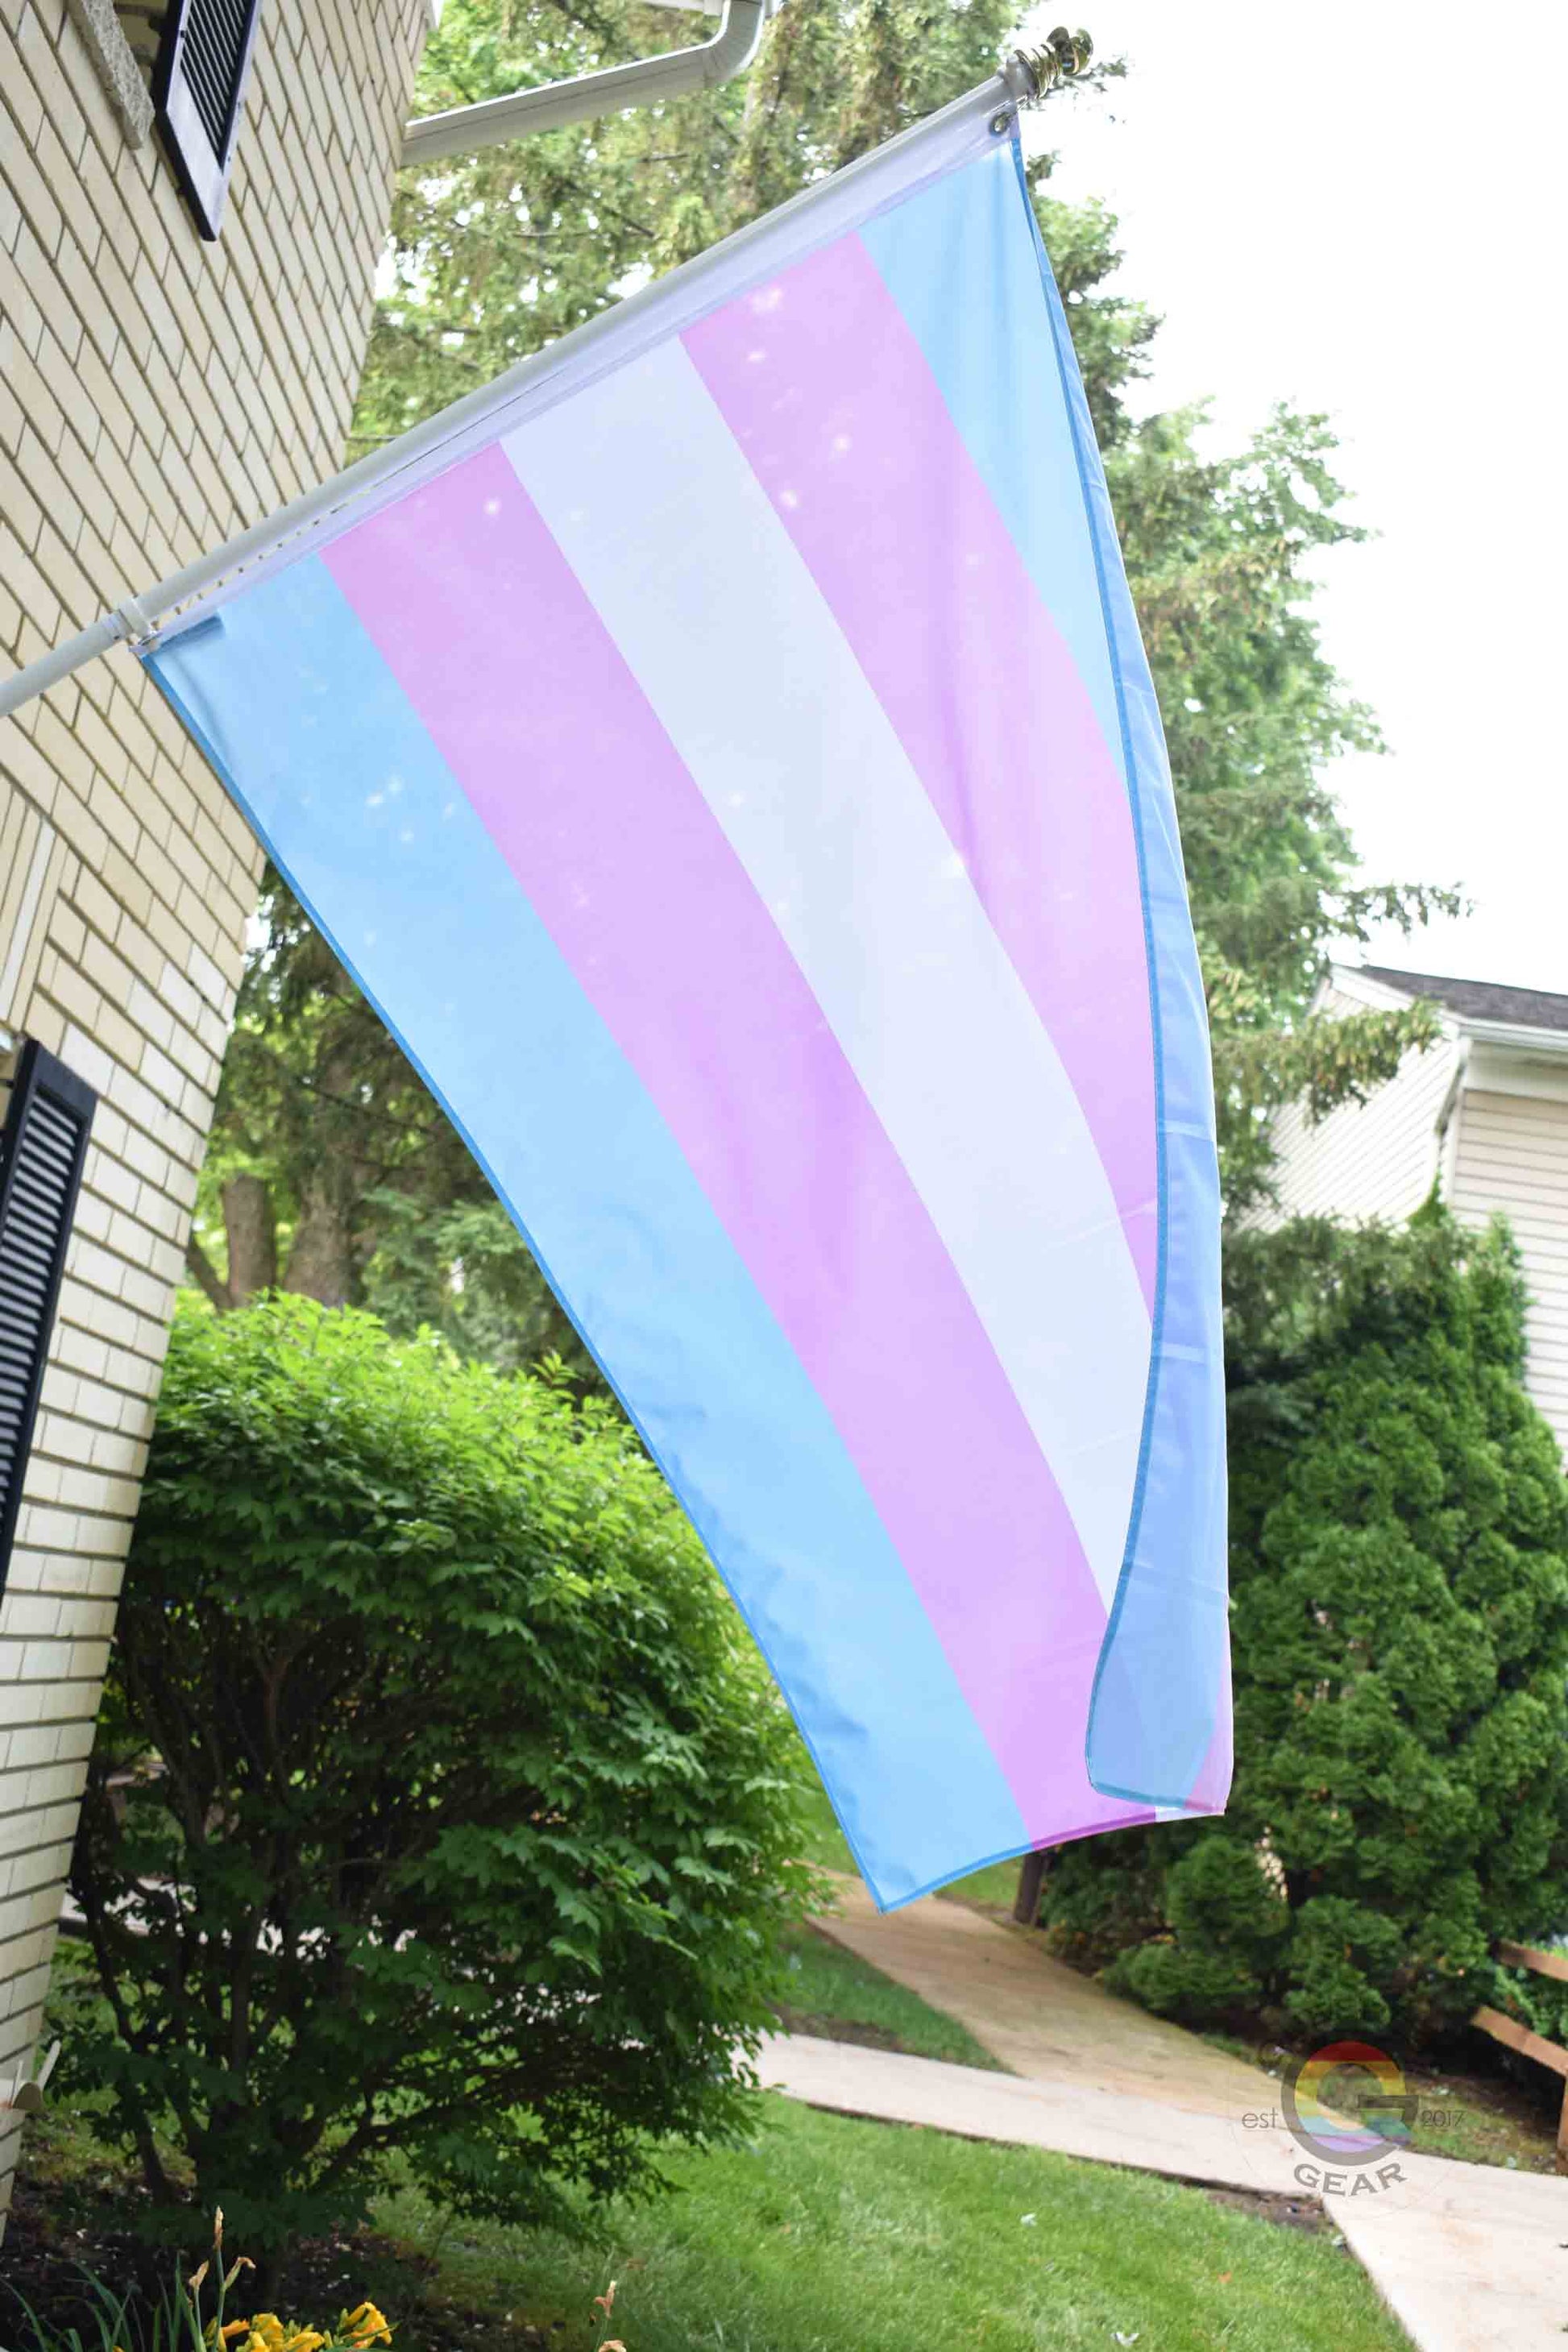 3’x5’ transgender pride flag hanging from a flagpole on the outside of a light brick house with dark shutters